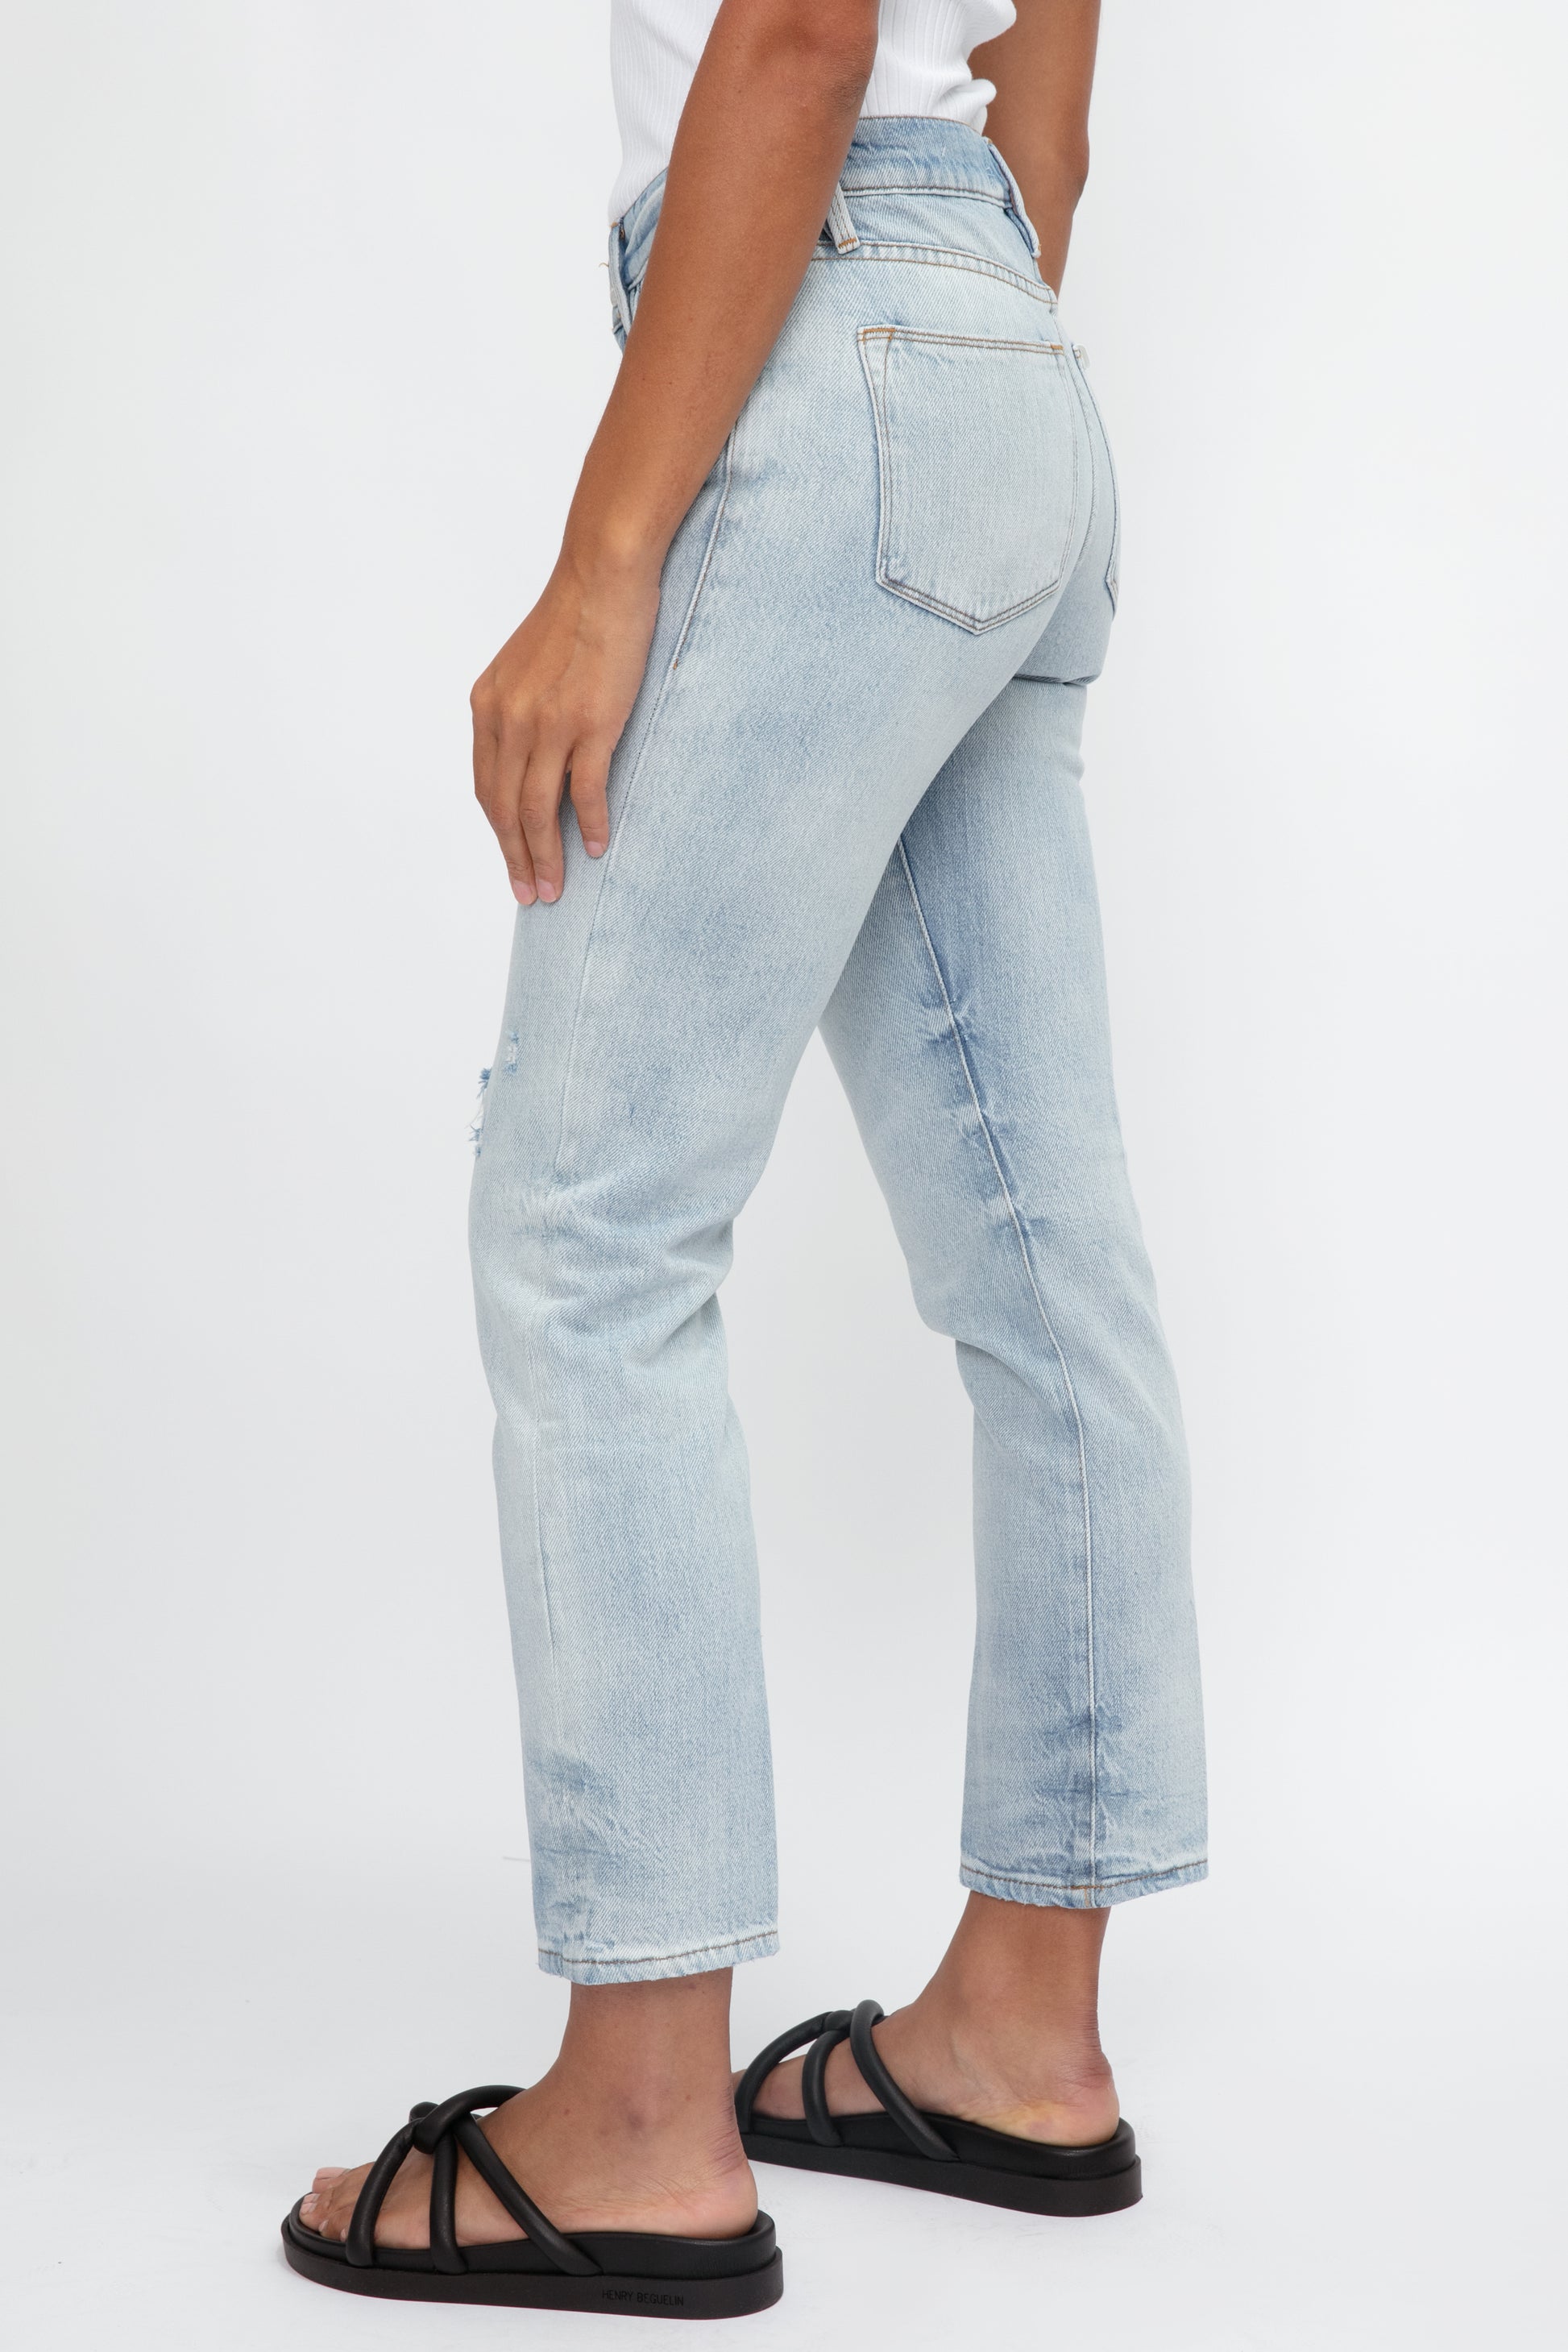 FRAME Le High Straight Jean in Winslow